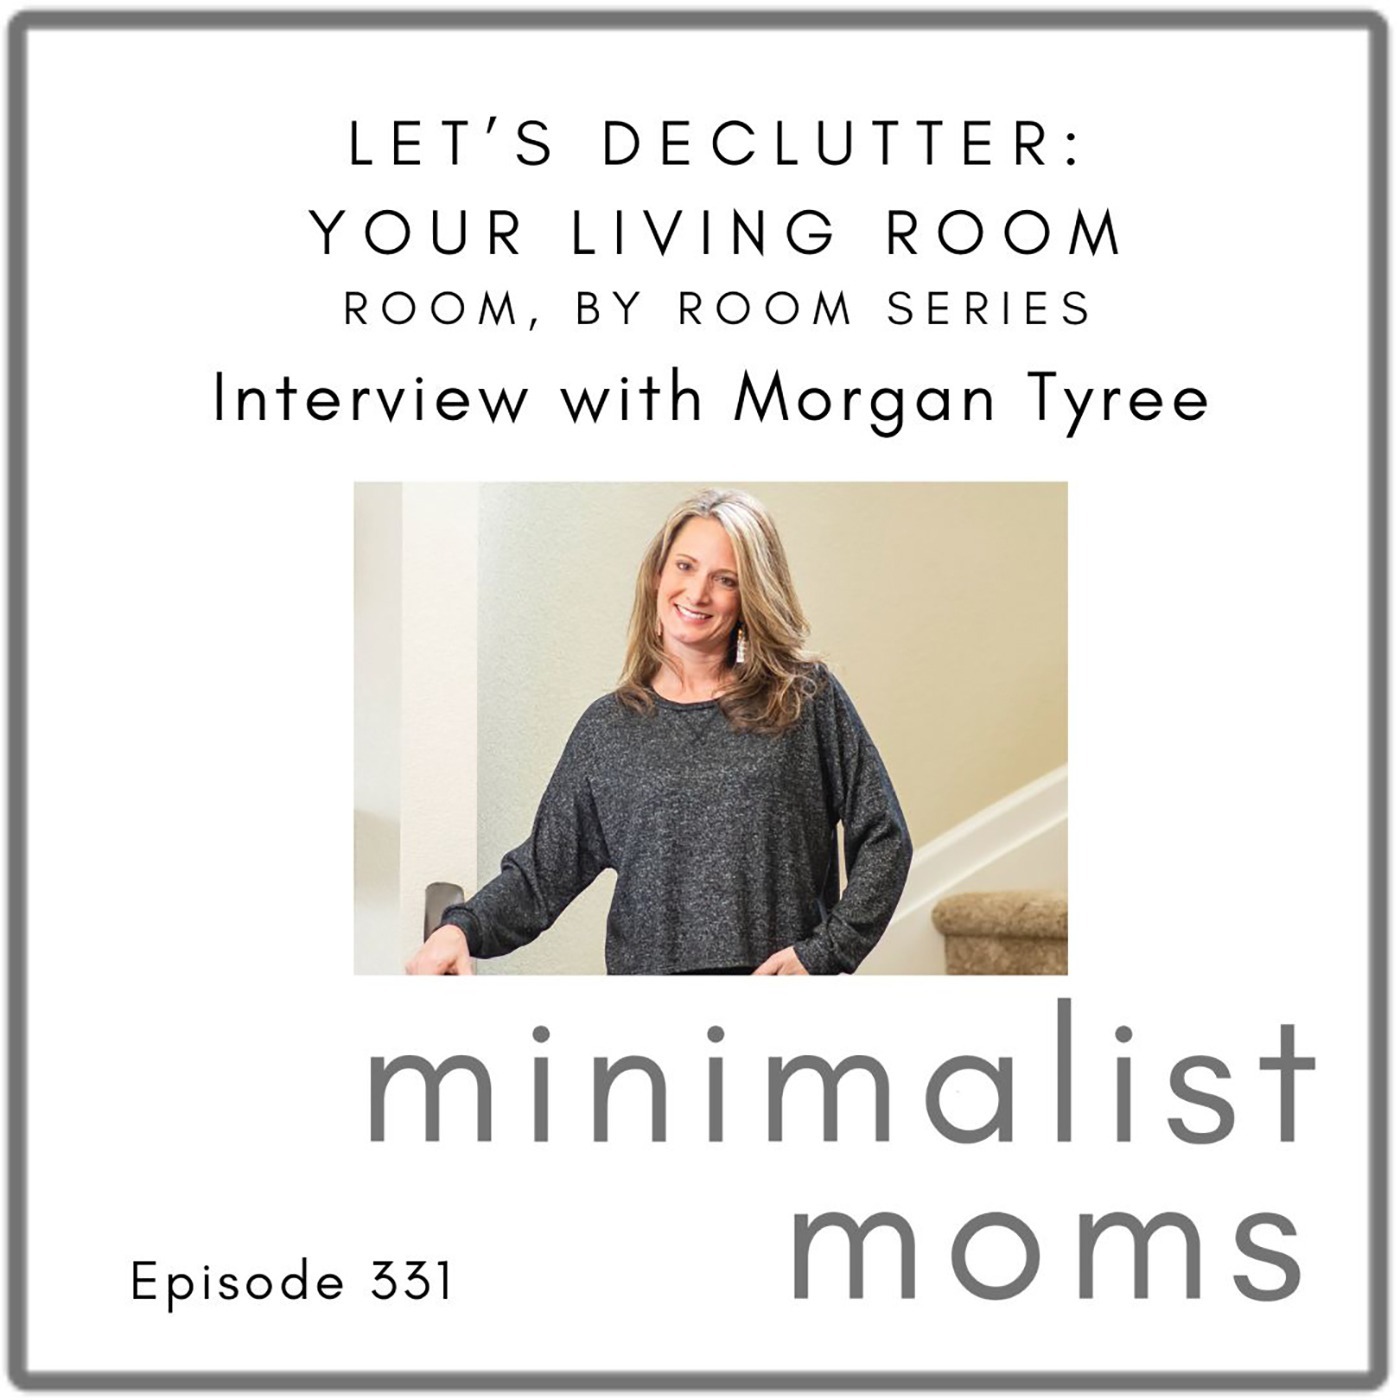 Let's Declutter: Your Living Room with Morgan Tyree (EP331) [Room by Room Series]